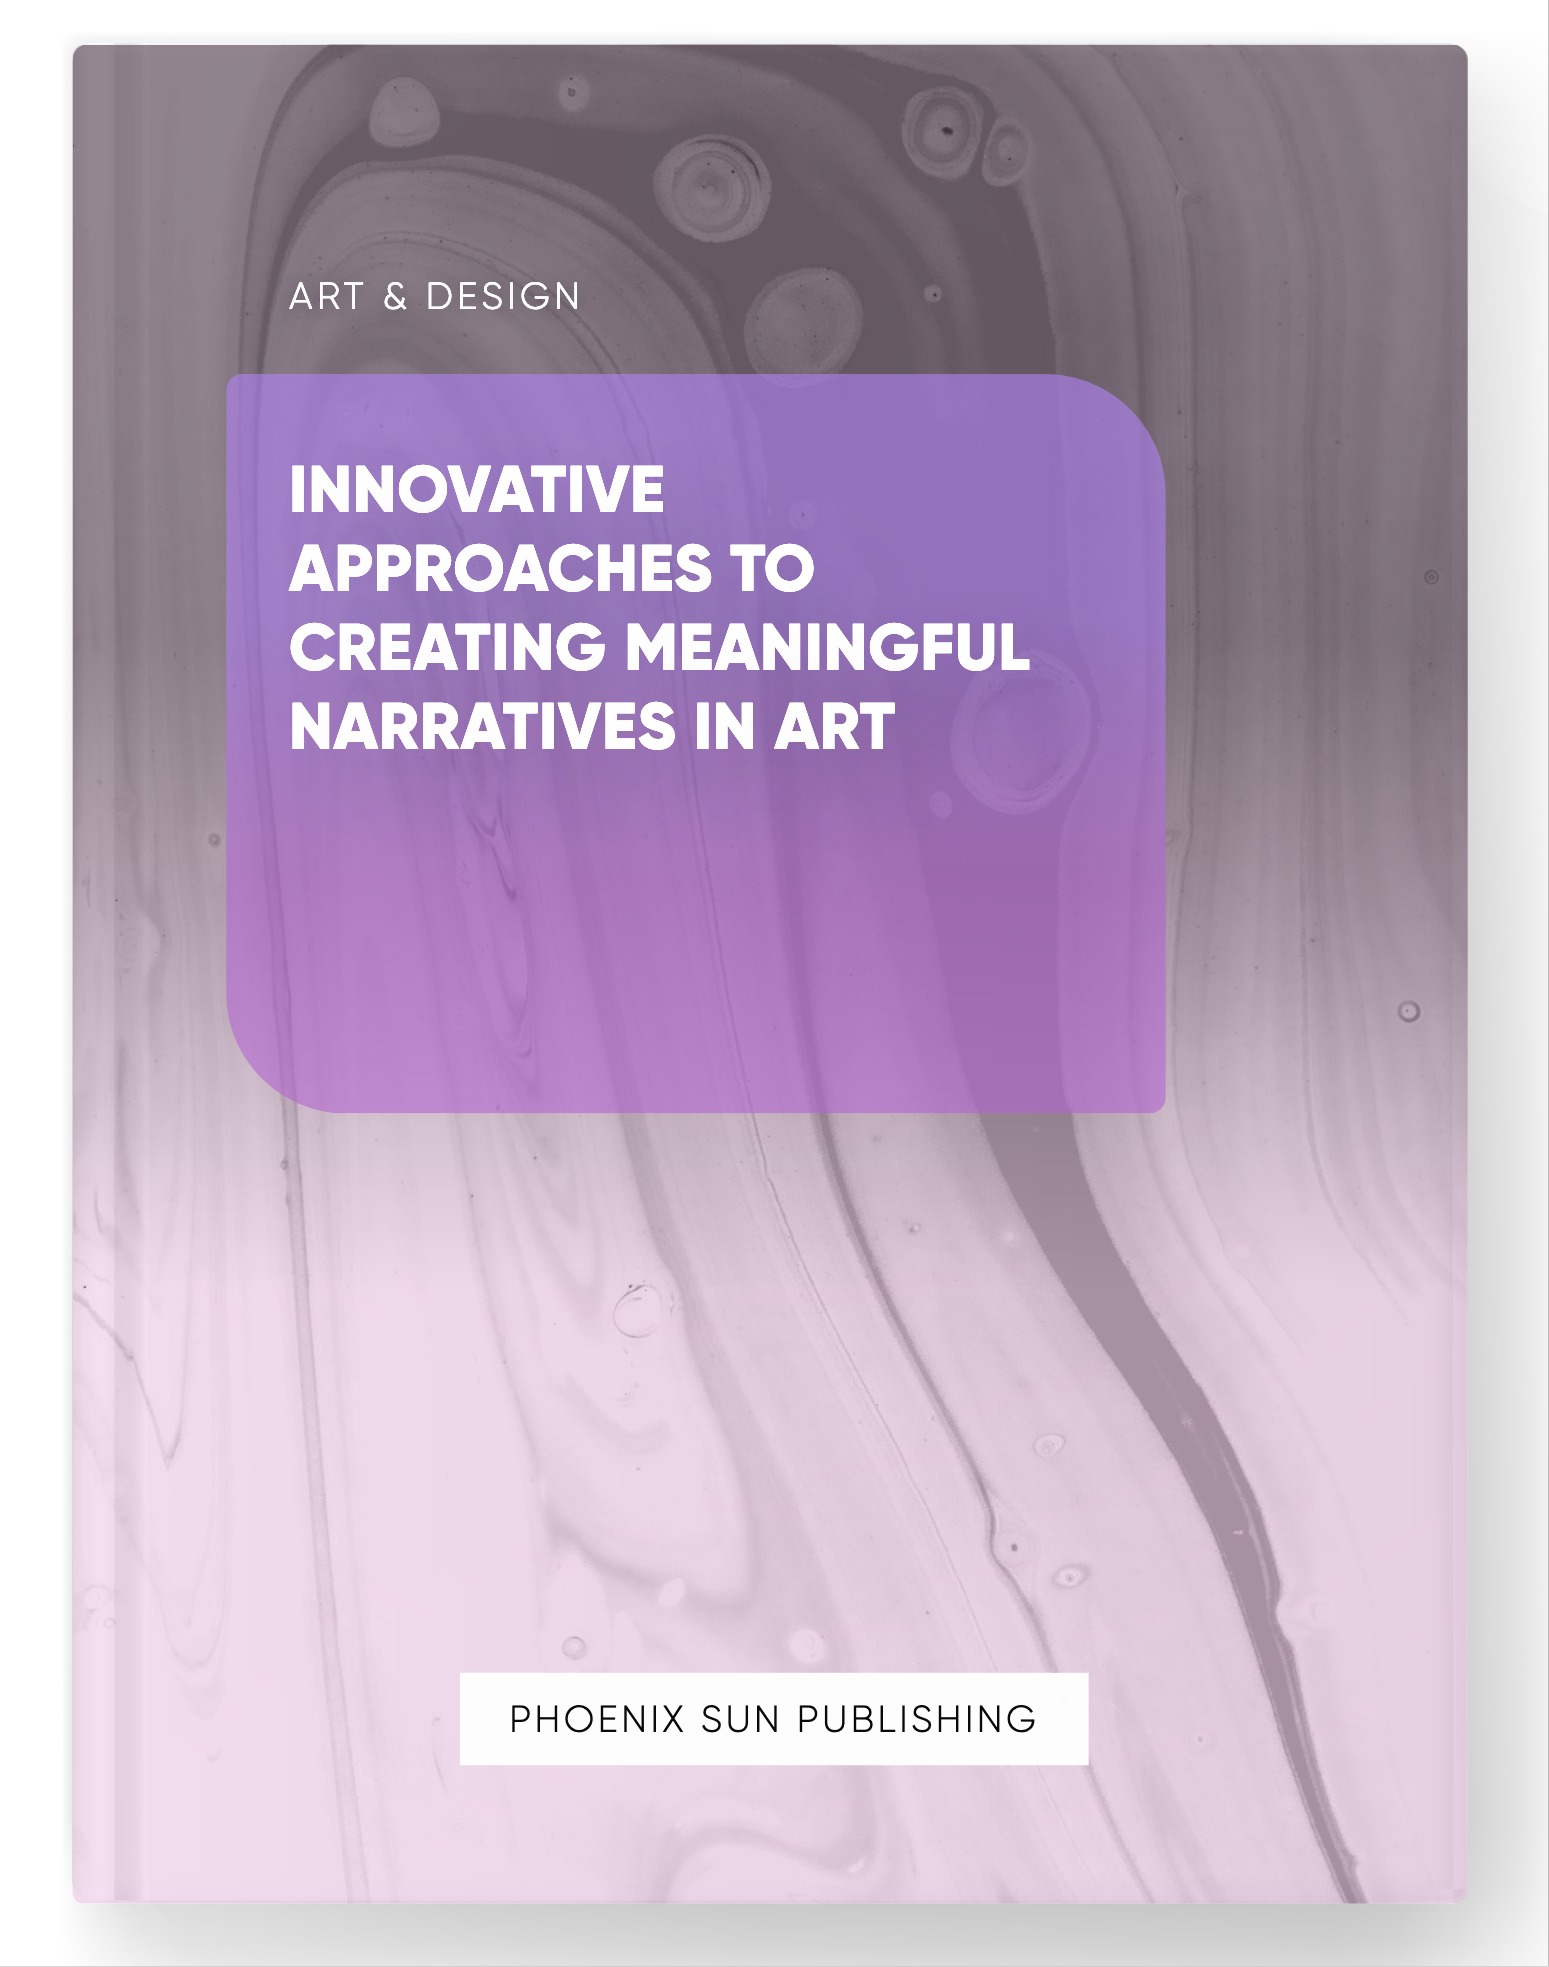 Innovative Approaches to Creating Meaningful Narratives in Art